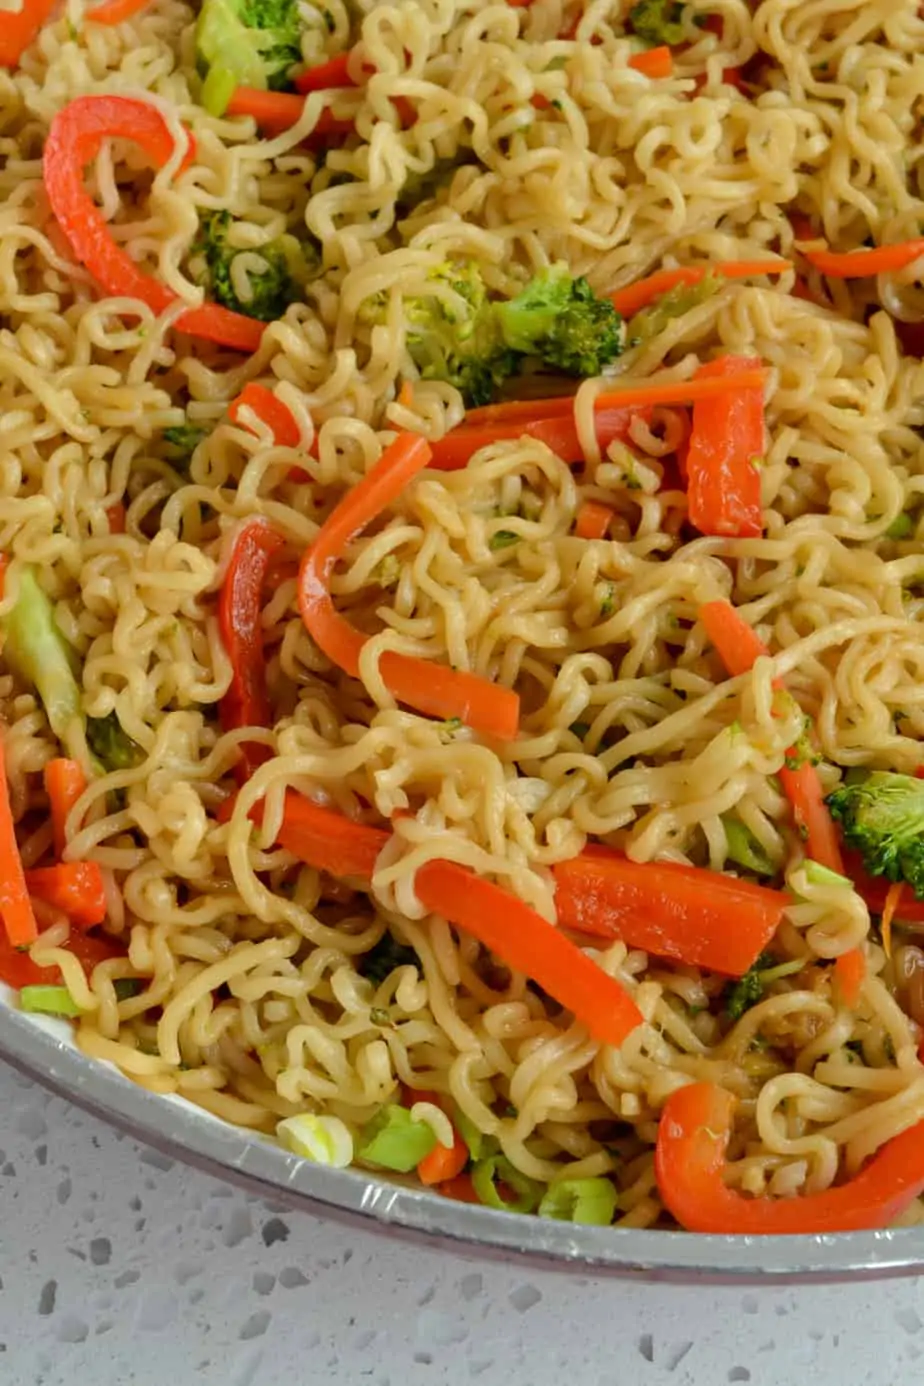 Ramen noodles combined with peppers, carrots and broccoli.